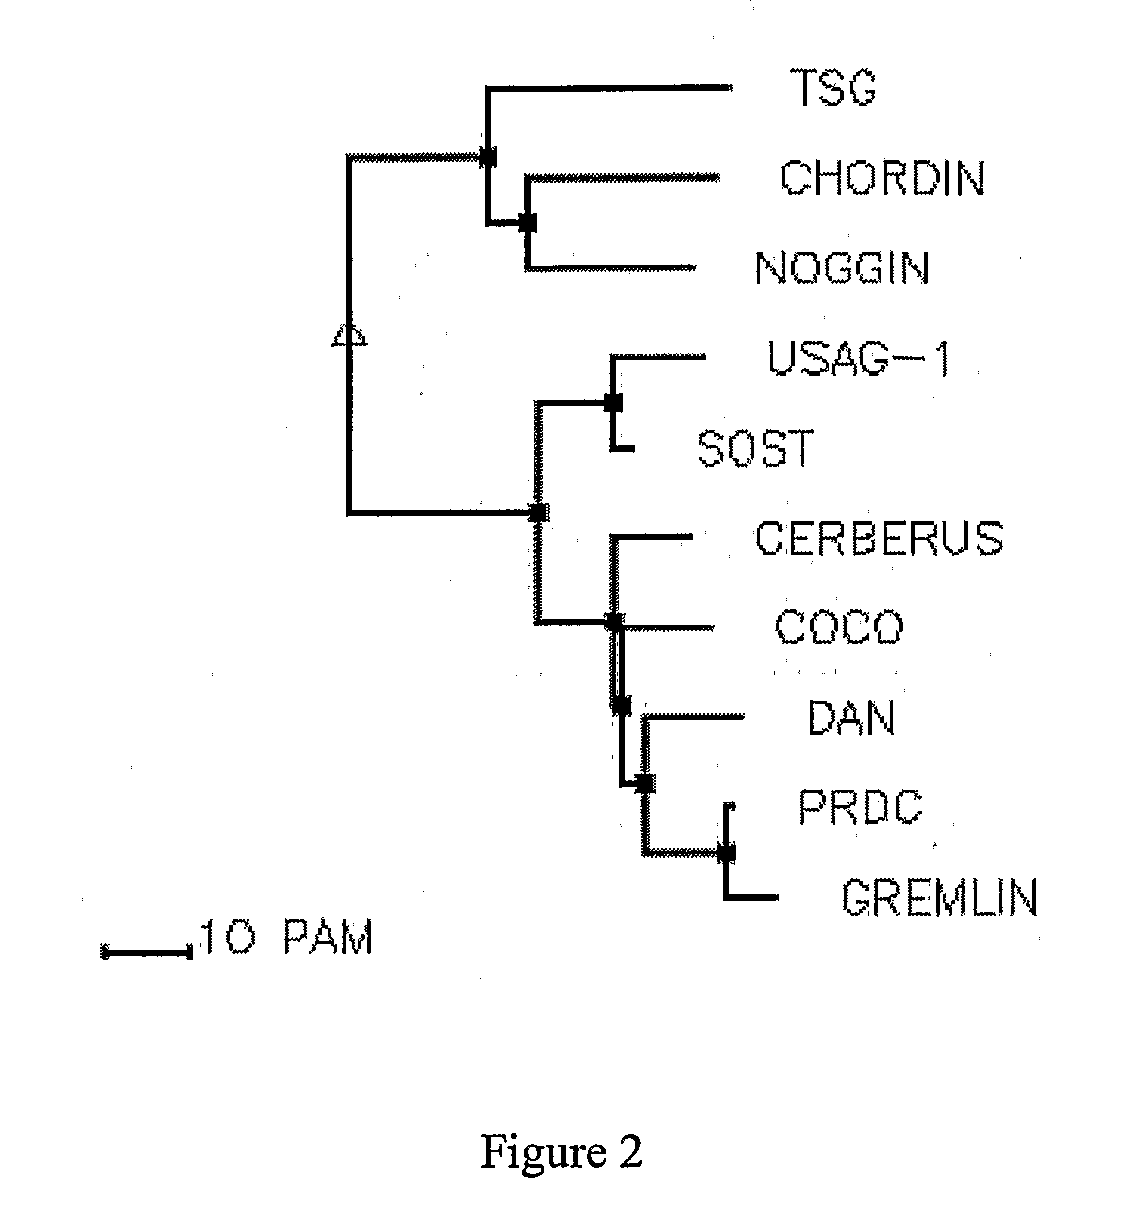 Tgf Derepressors and Uses Related Thereto